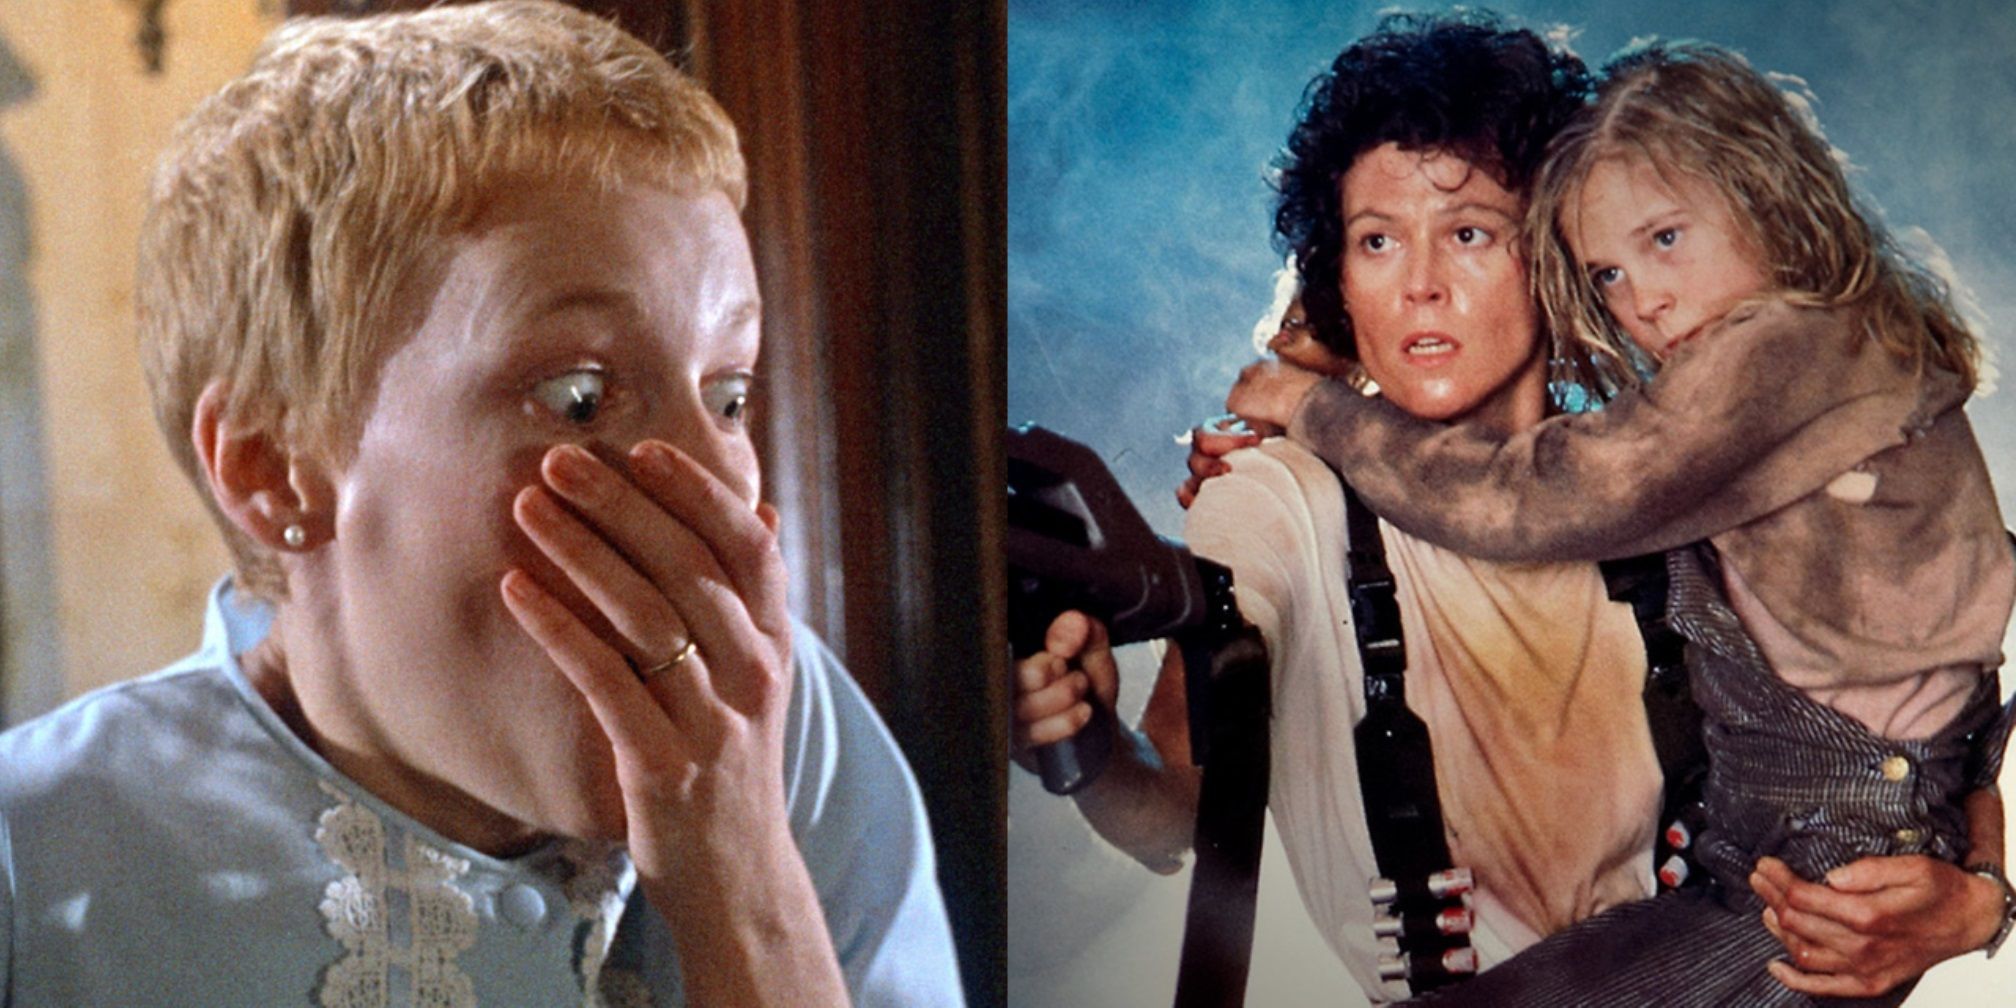 Split image of Rosemary in Rosemary's Baby and Ripley and Newt in Aliens